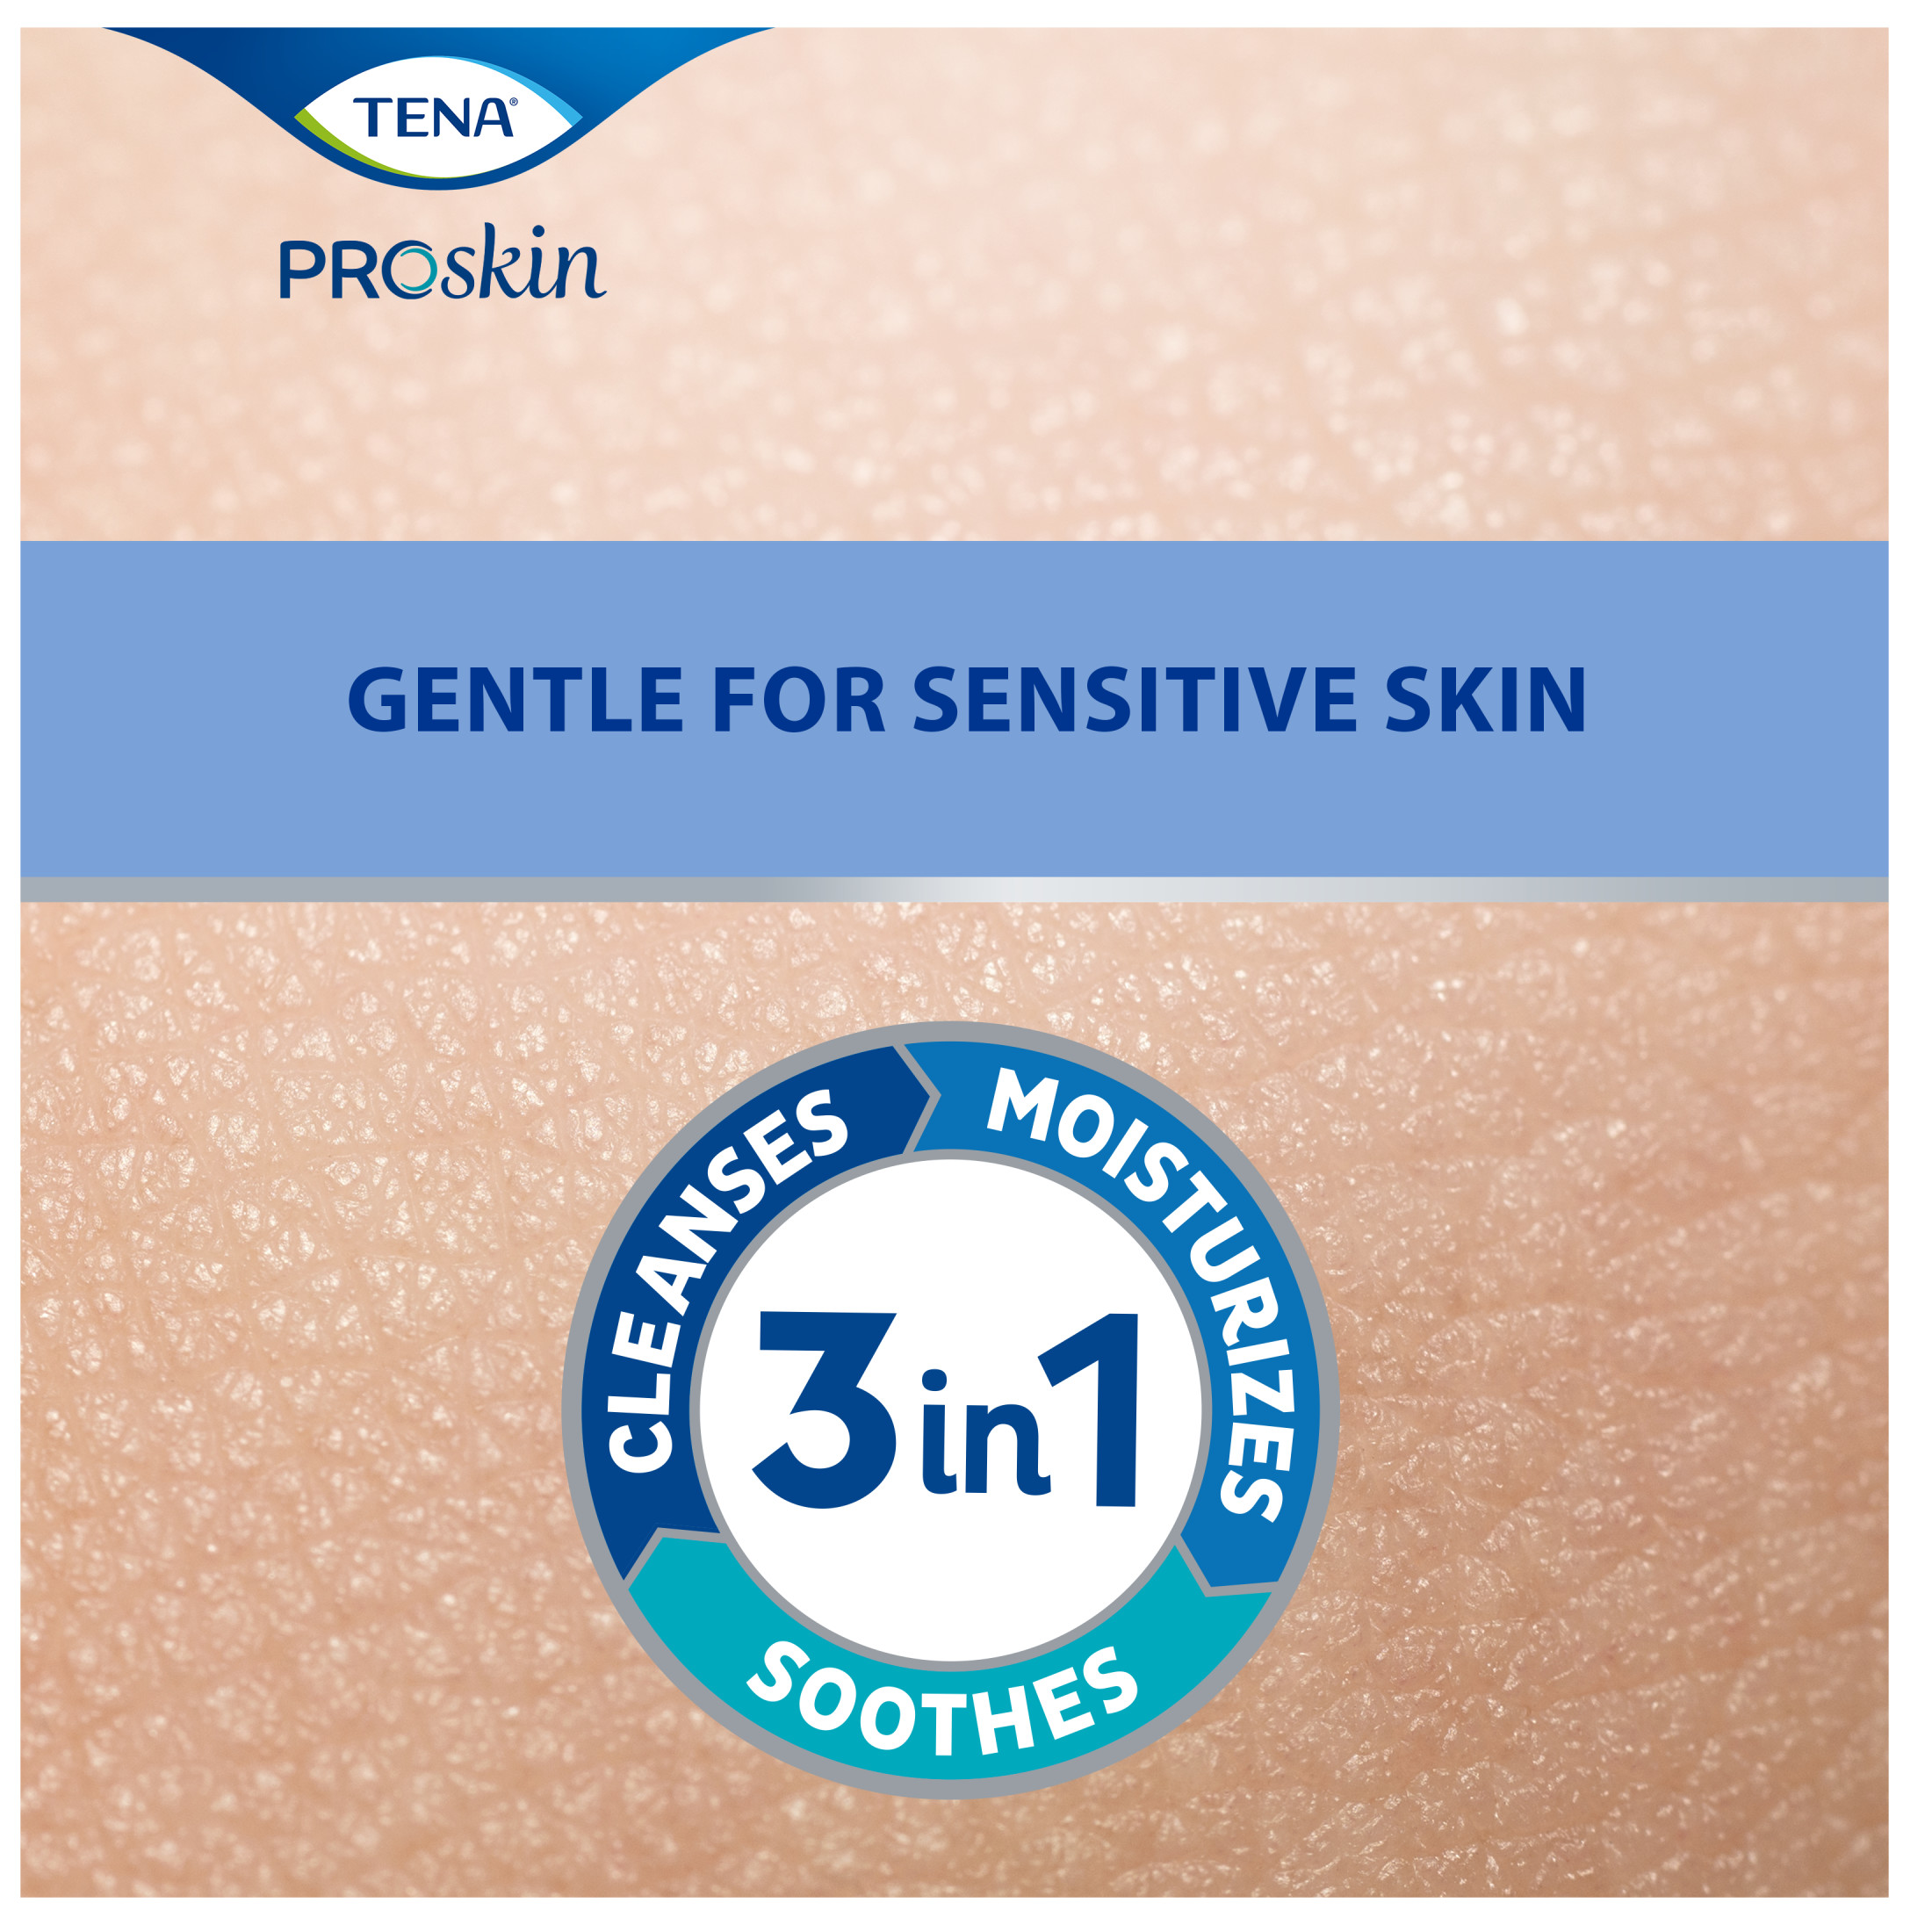 Tena ProSkin Cleansing Cream promotes skin health by gently cleansing, moisturizing and soothing skin. No rinse formula makes bathing easy. - image 3 of 7